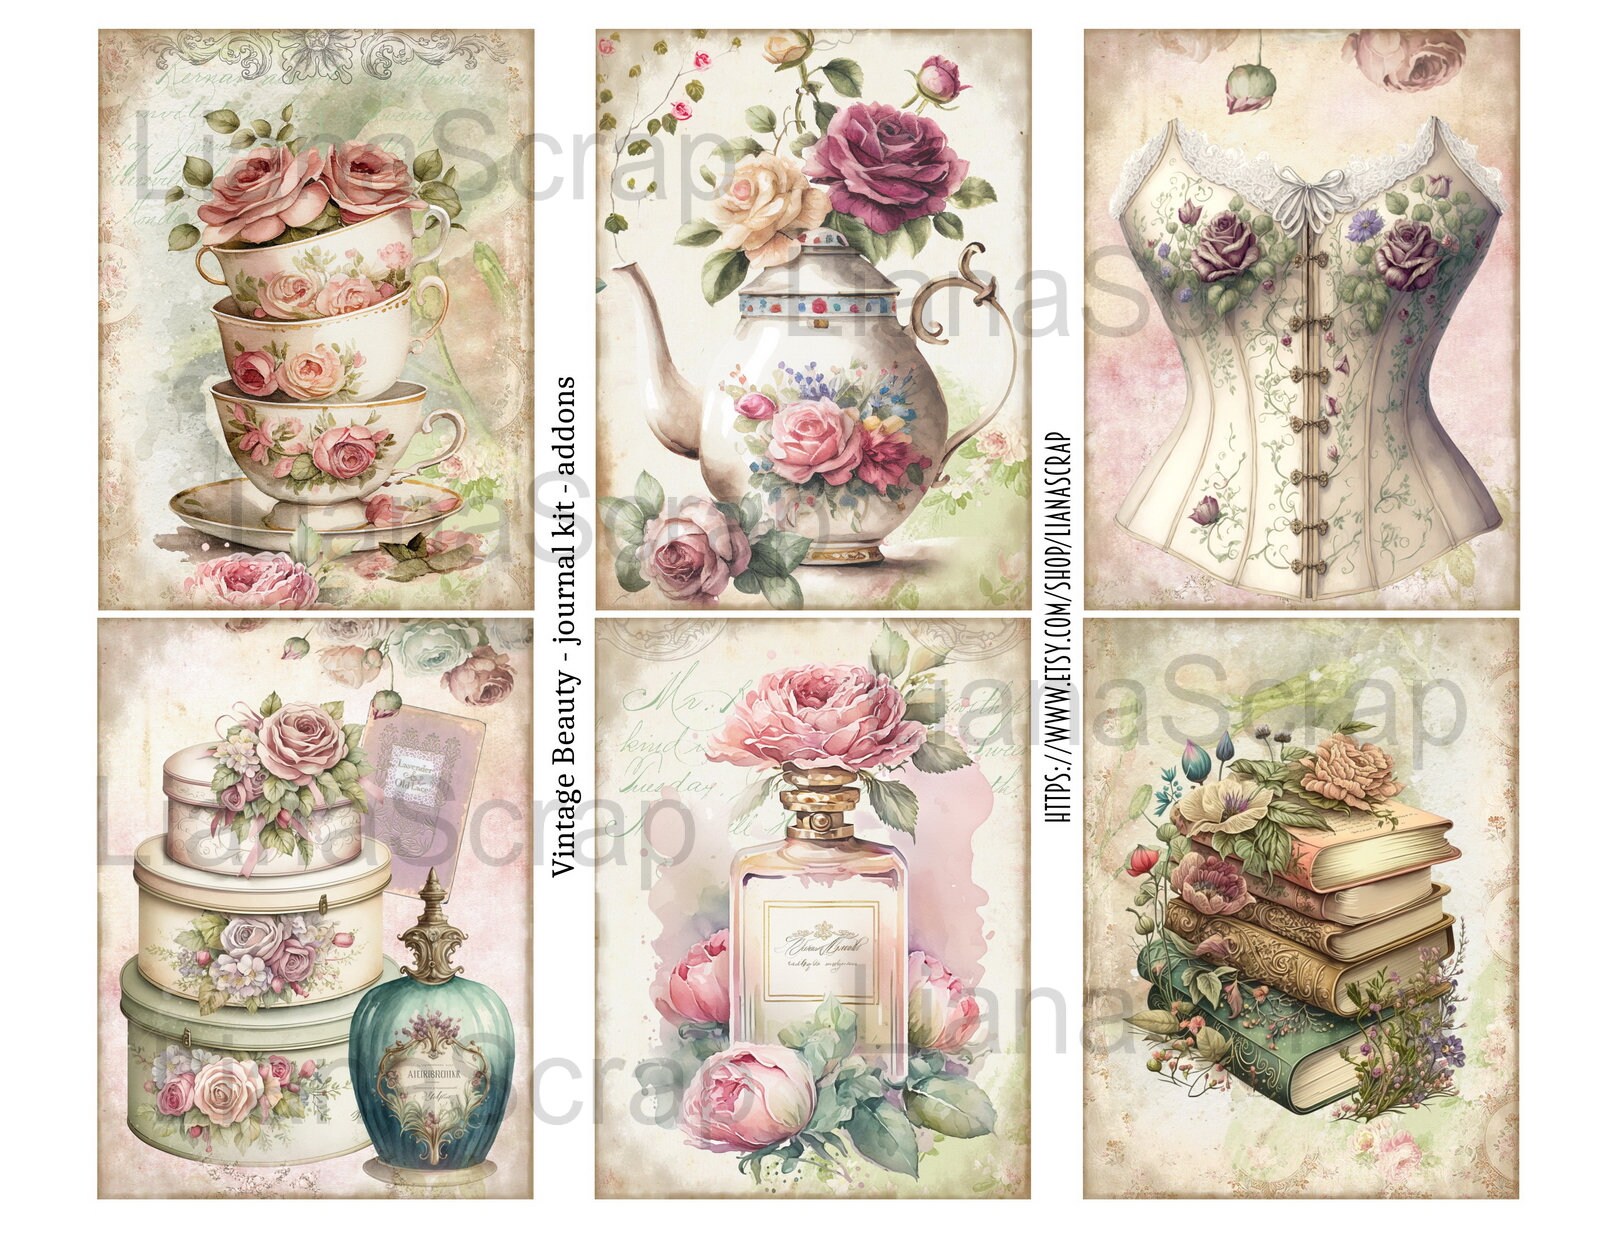 Vintage Victorian Journal Scrapbook Kit Graphic by The Paper Princess ·  Creative Fabrica